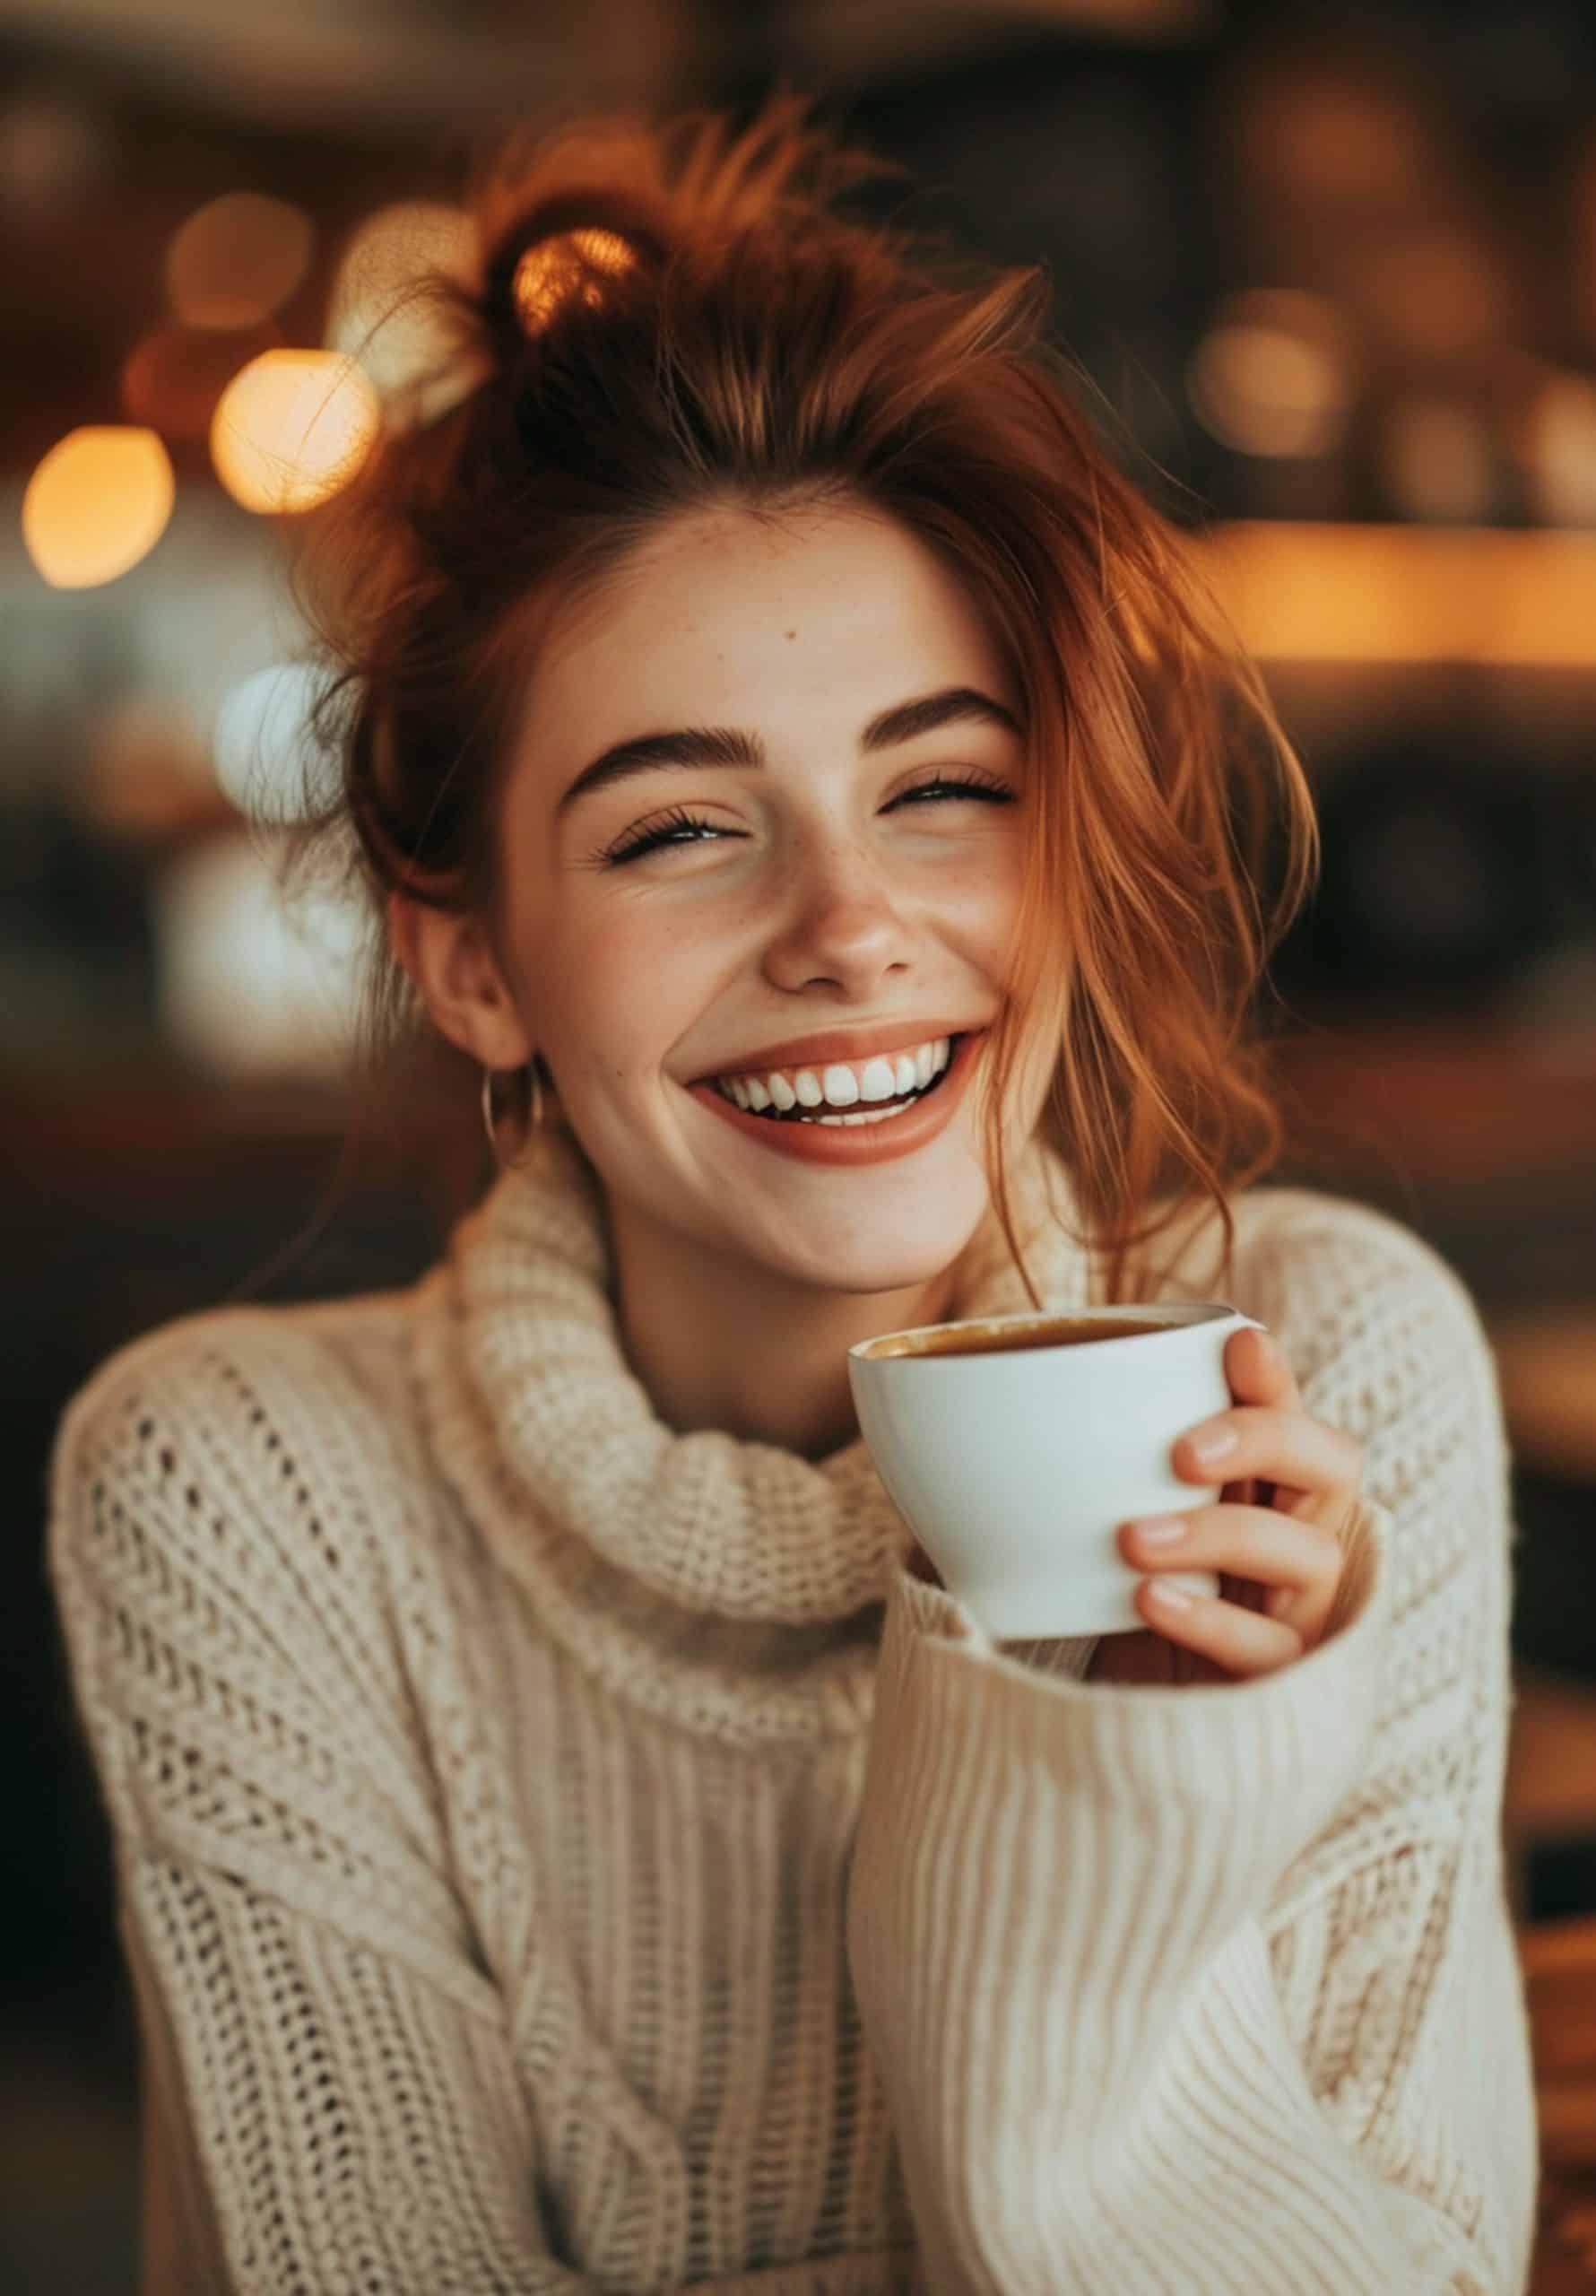 lady smiling with a cuppa coffee